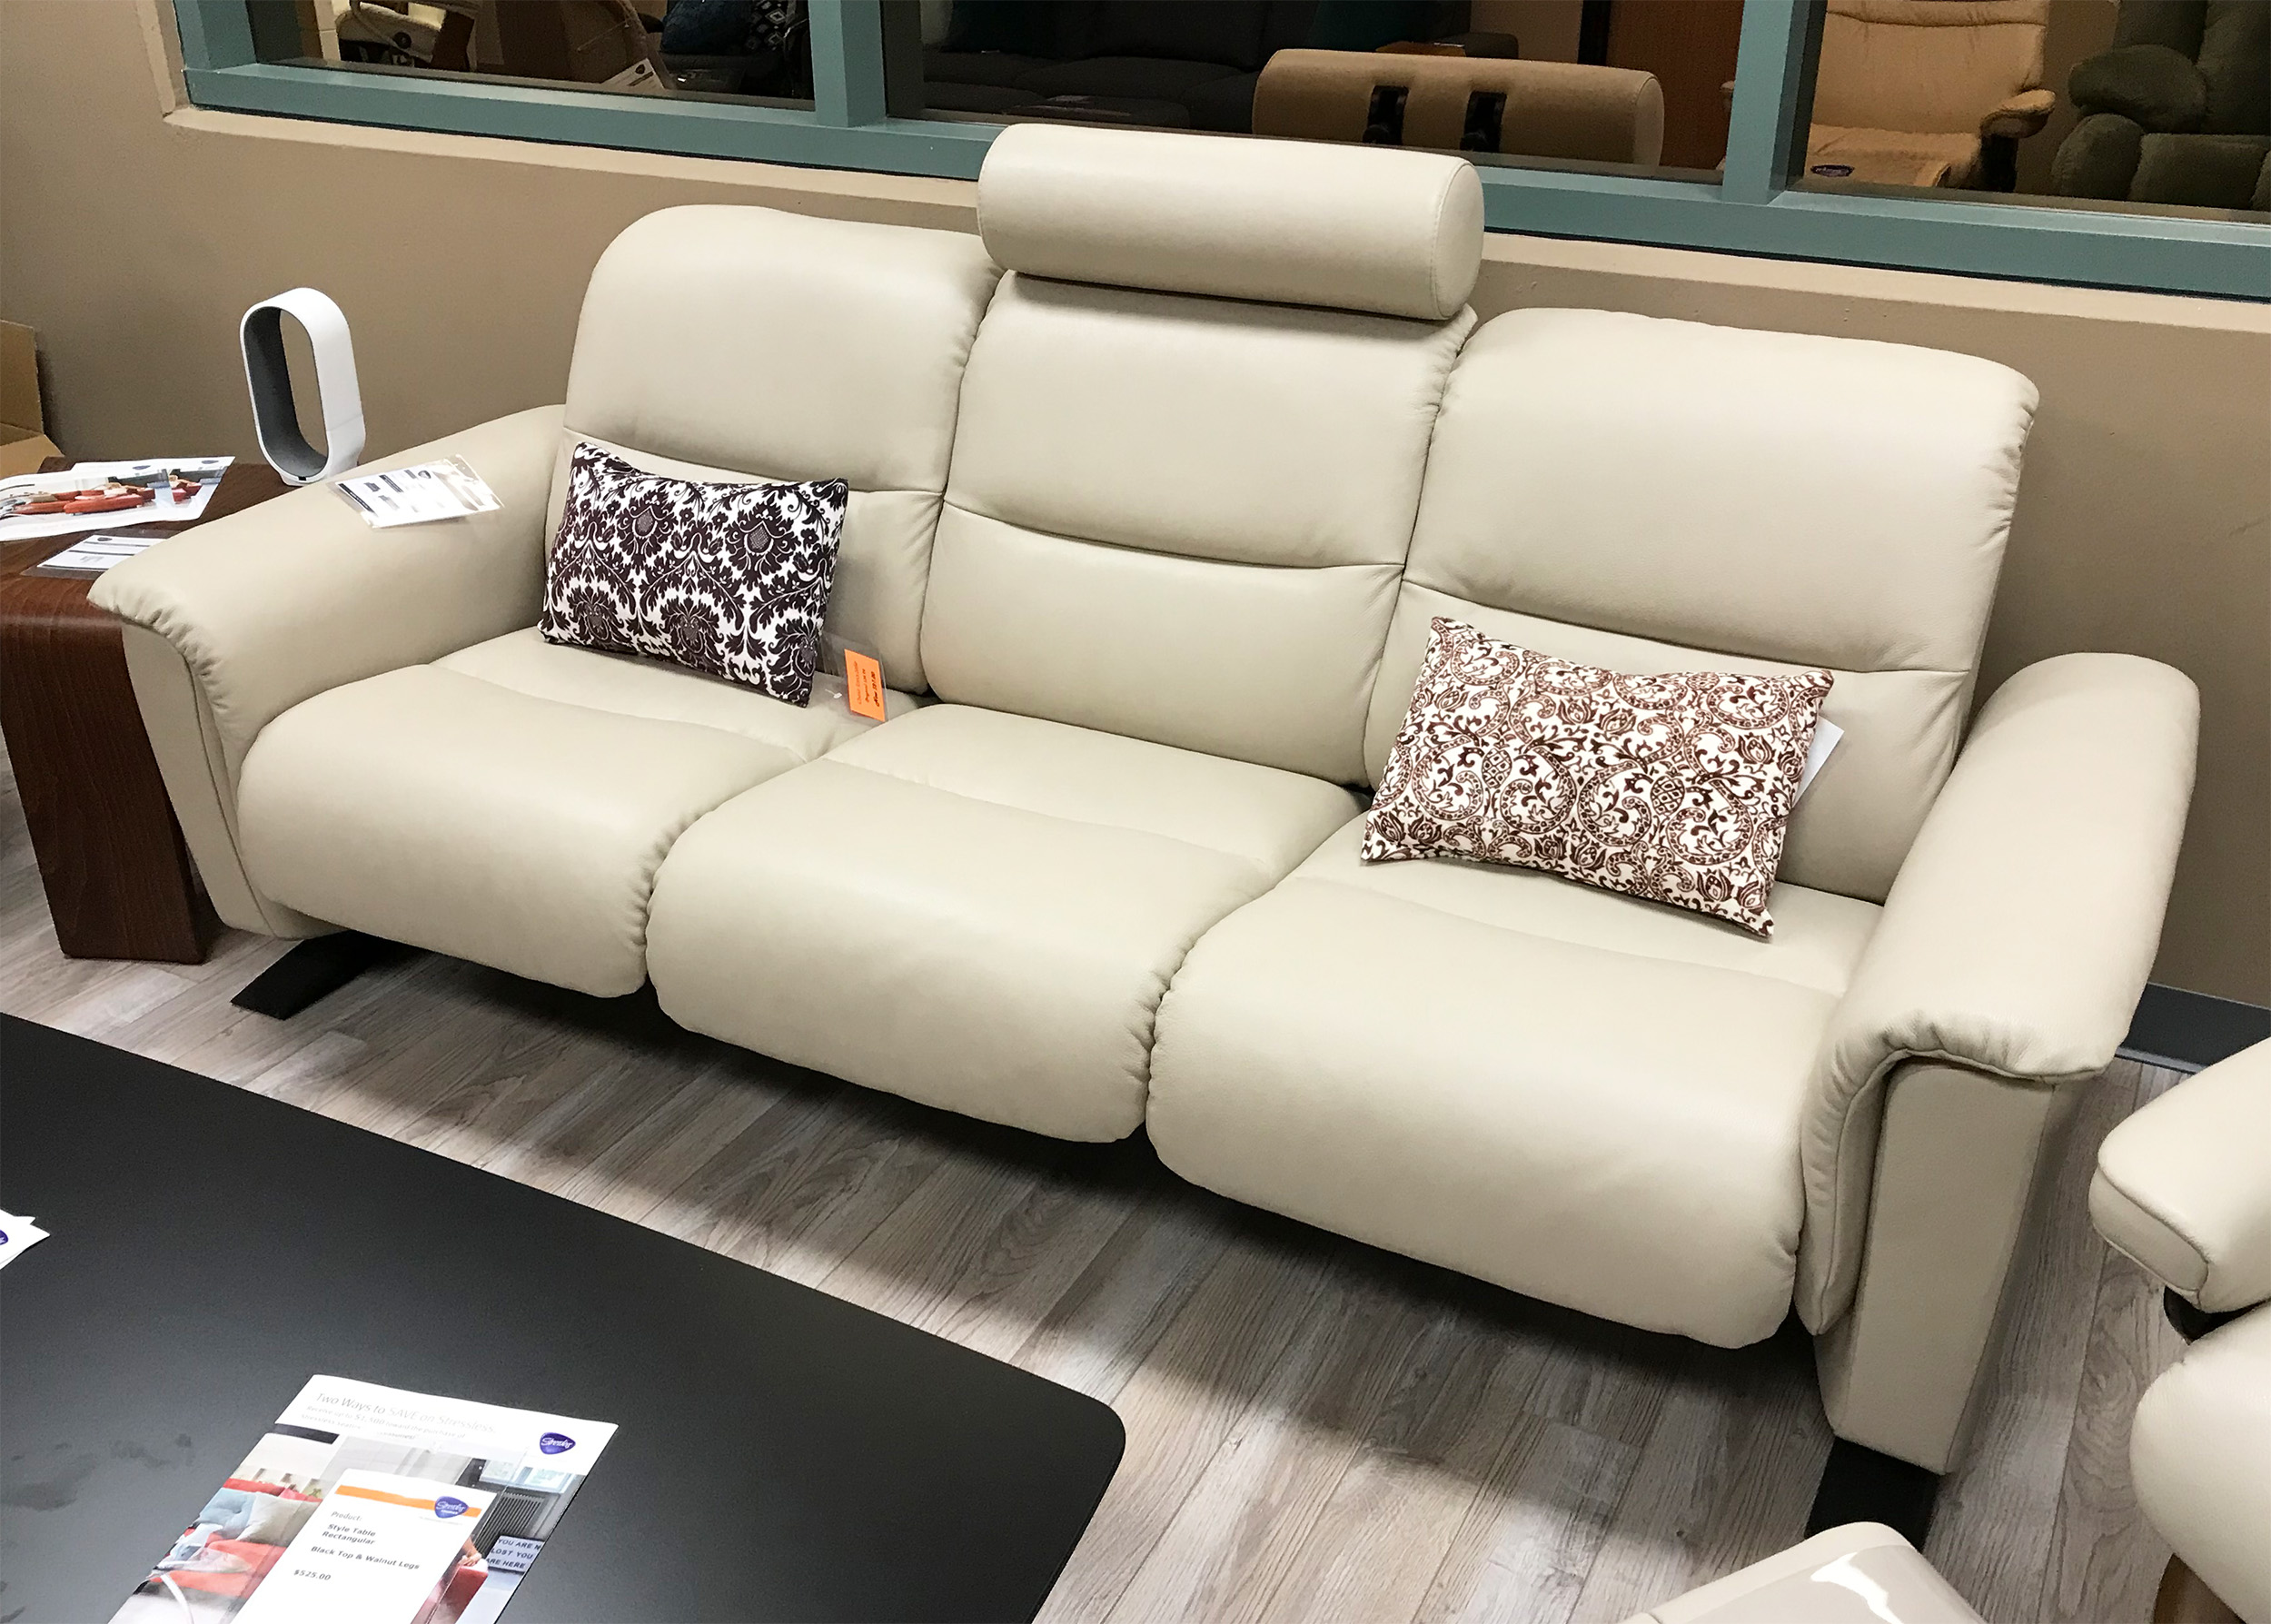 stressless sofa leather colors